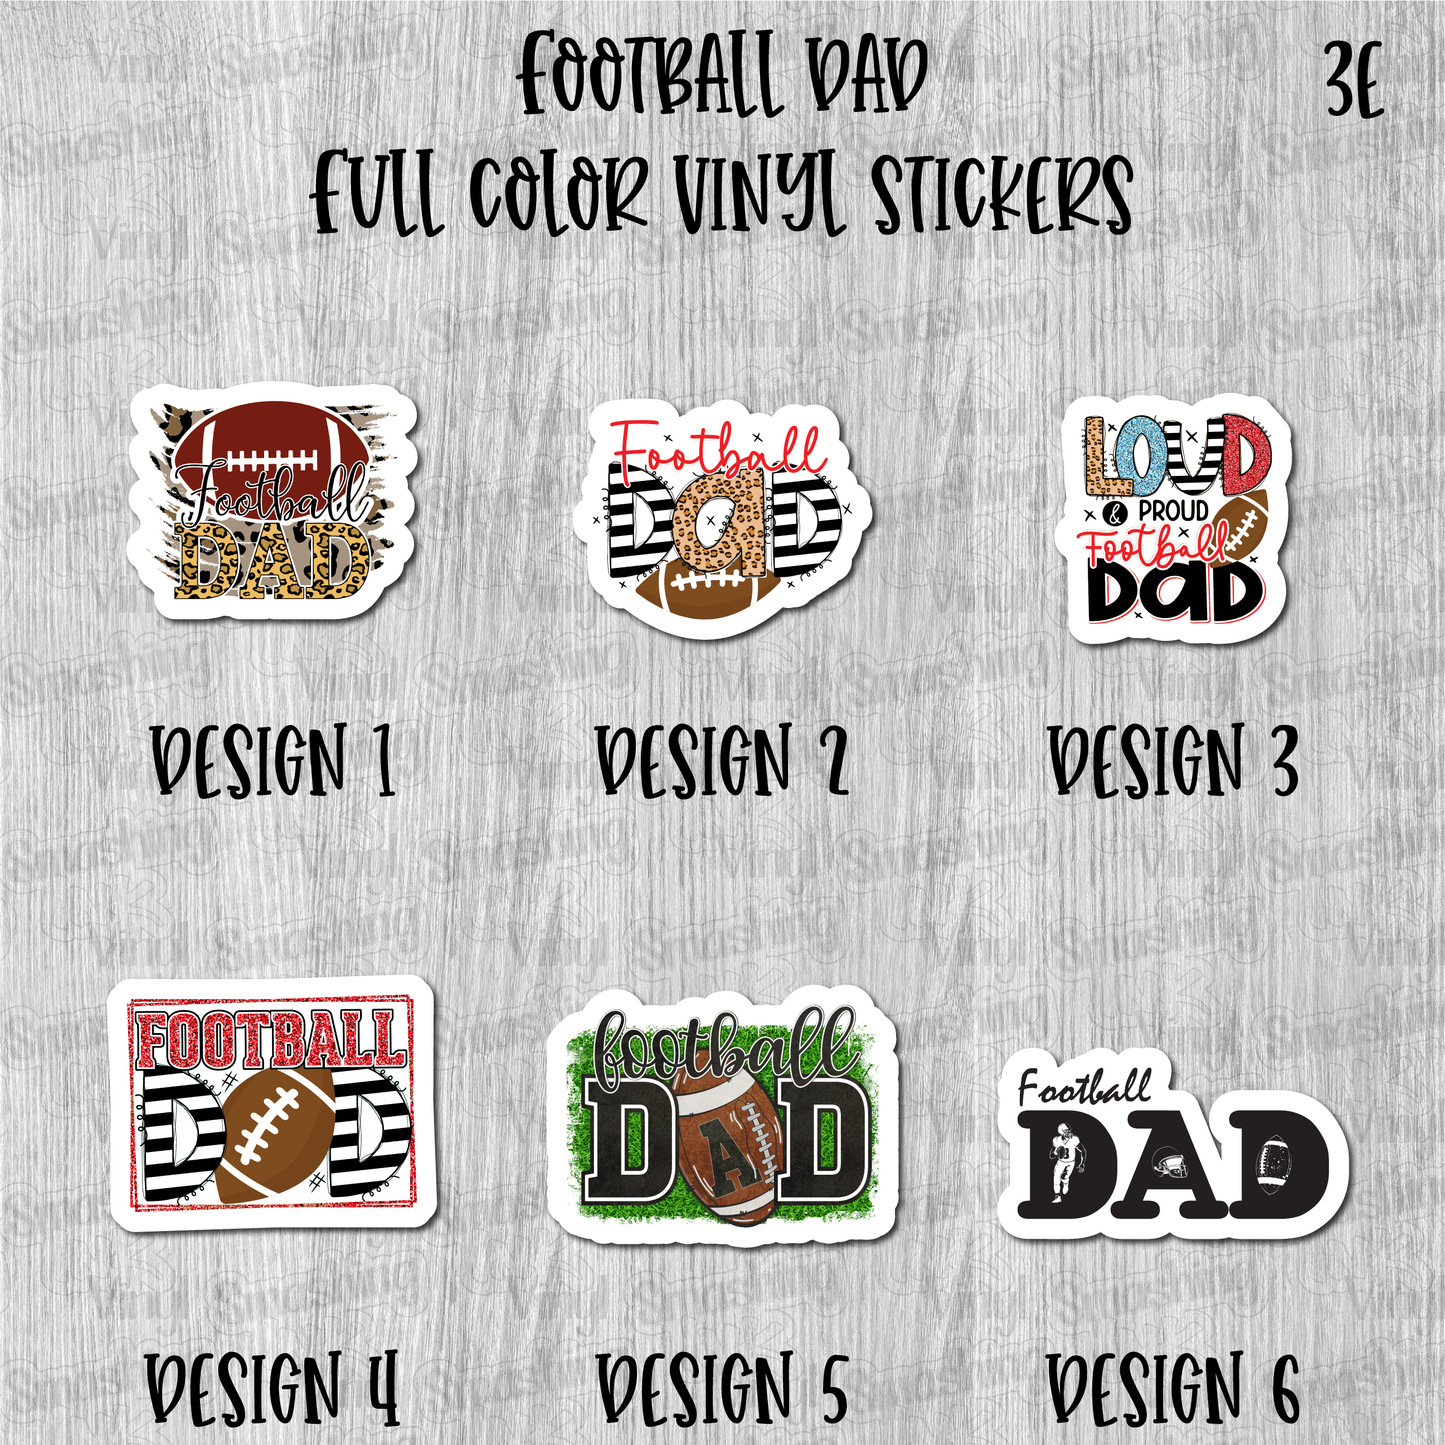 Football Dad - Full Color Vinyl Stickers (SHIPS IN 3-7 BUS DAYS)